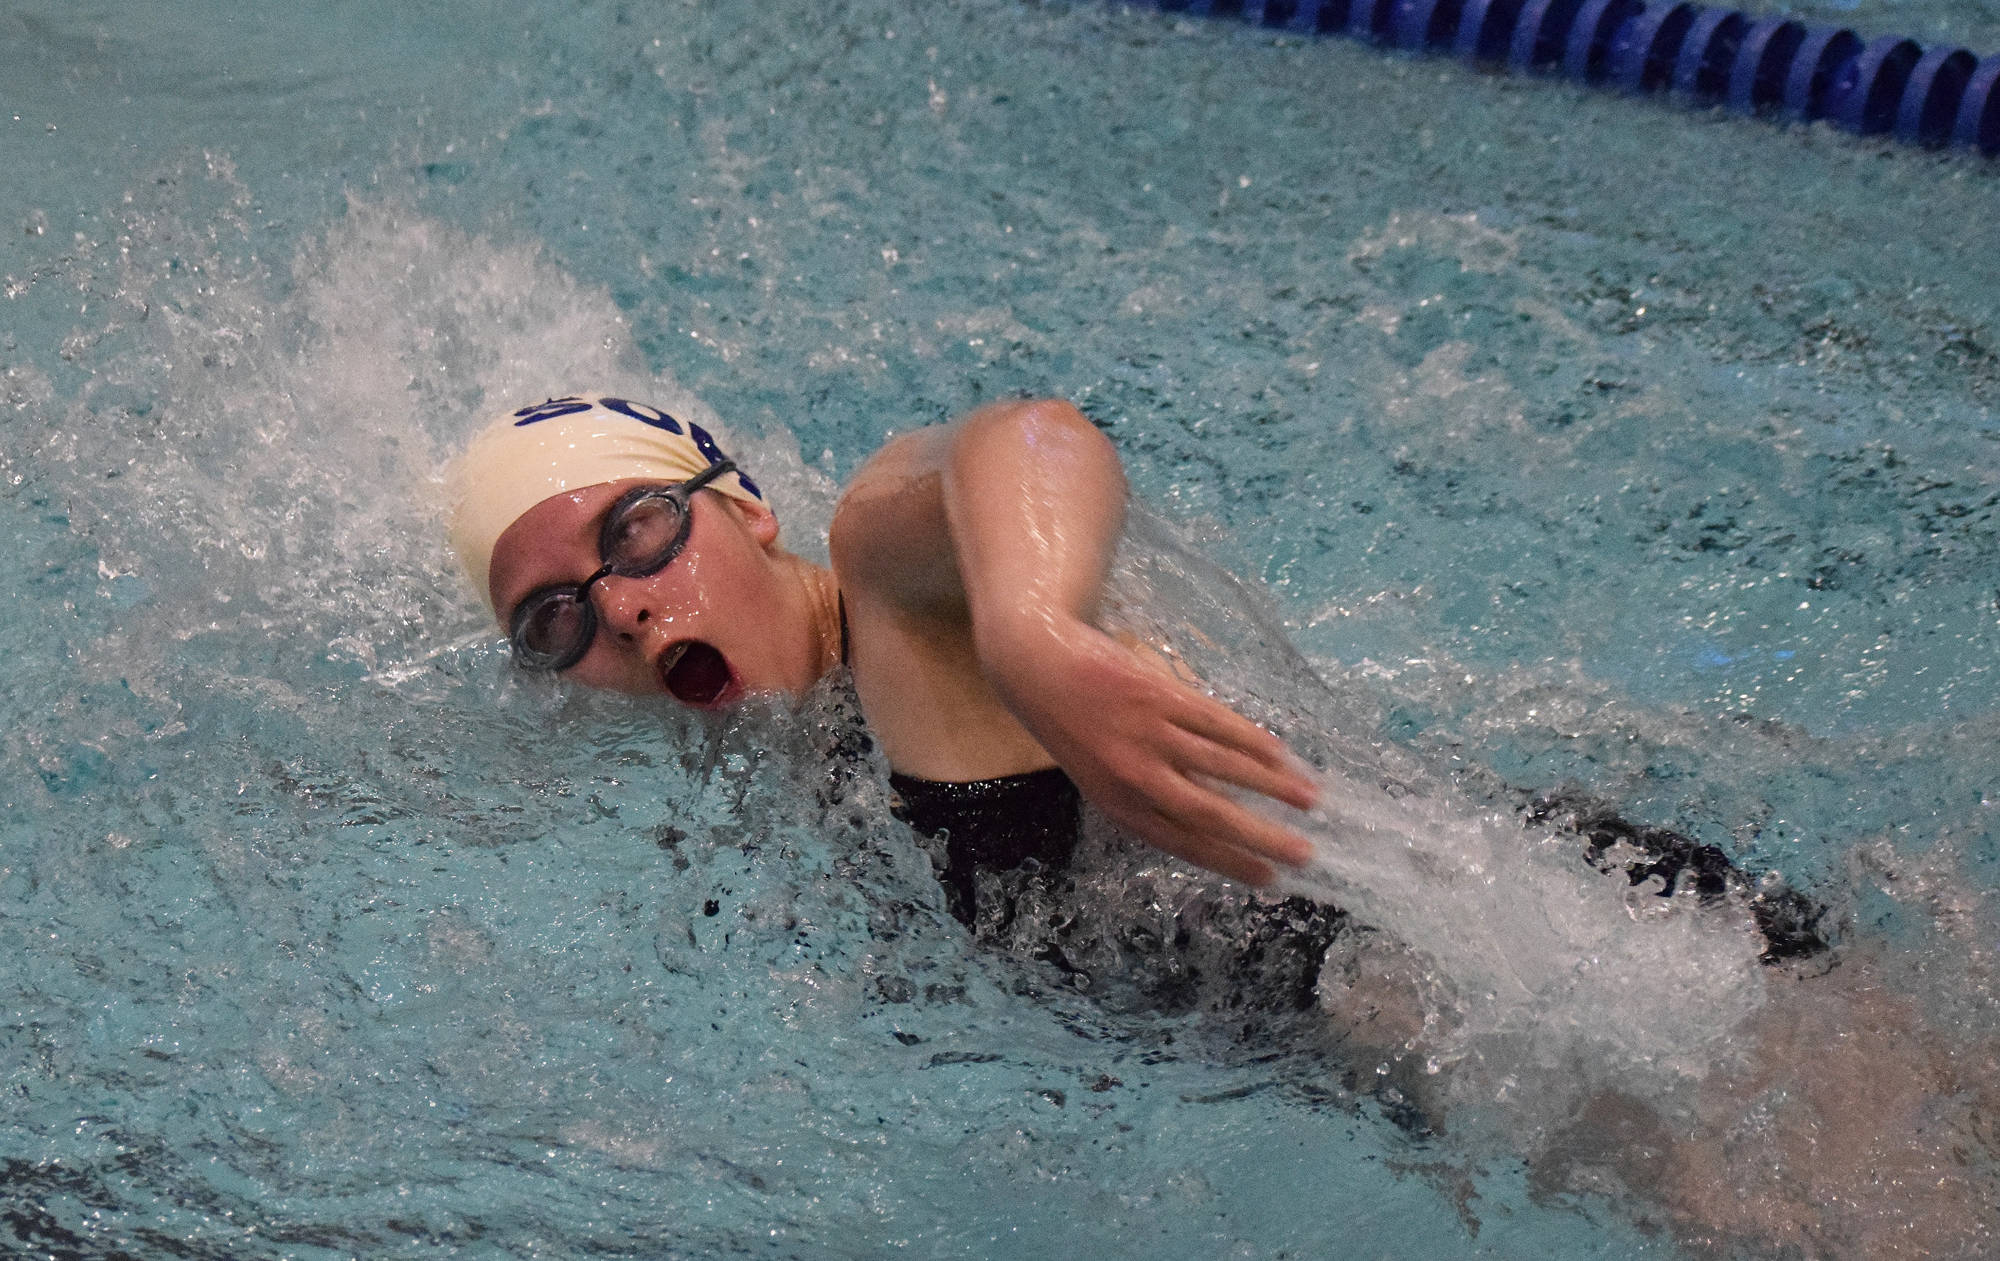 Soldotna’s Ester Frederickson competes in the girls 100-yard freestyle race at the SoHi dual meet Friday, Oct. 12, 2018 at Soldotna High School in Soldotna, Alaska. (Photo by Joey Klecka/Peninsula Clarion)